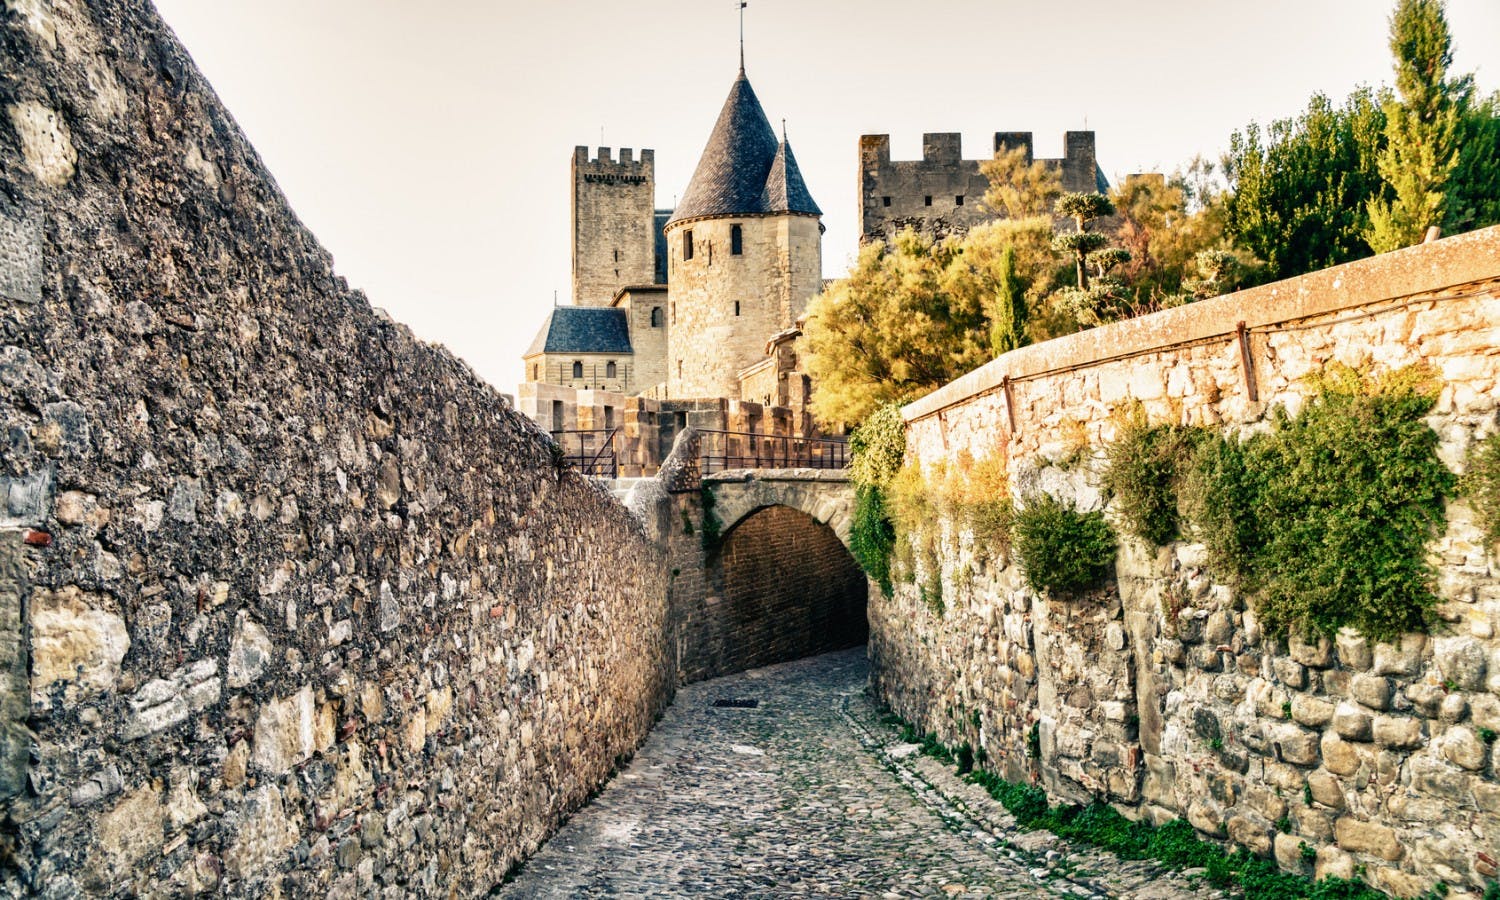 Explore History at the Château Comtal in Carcassonne